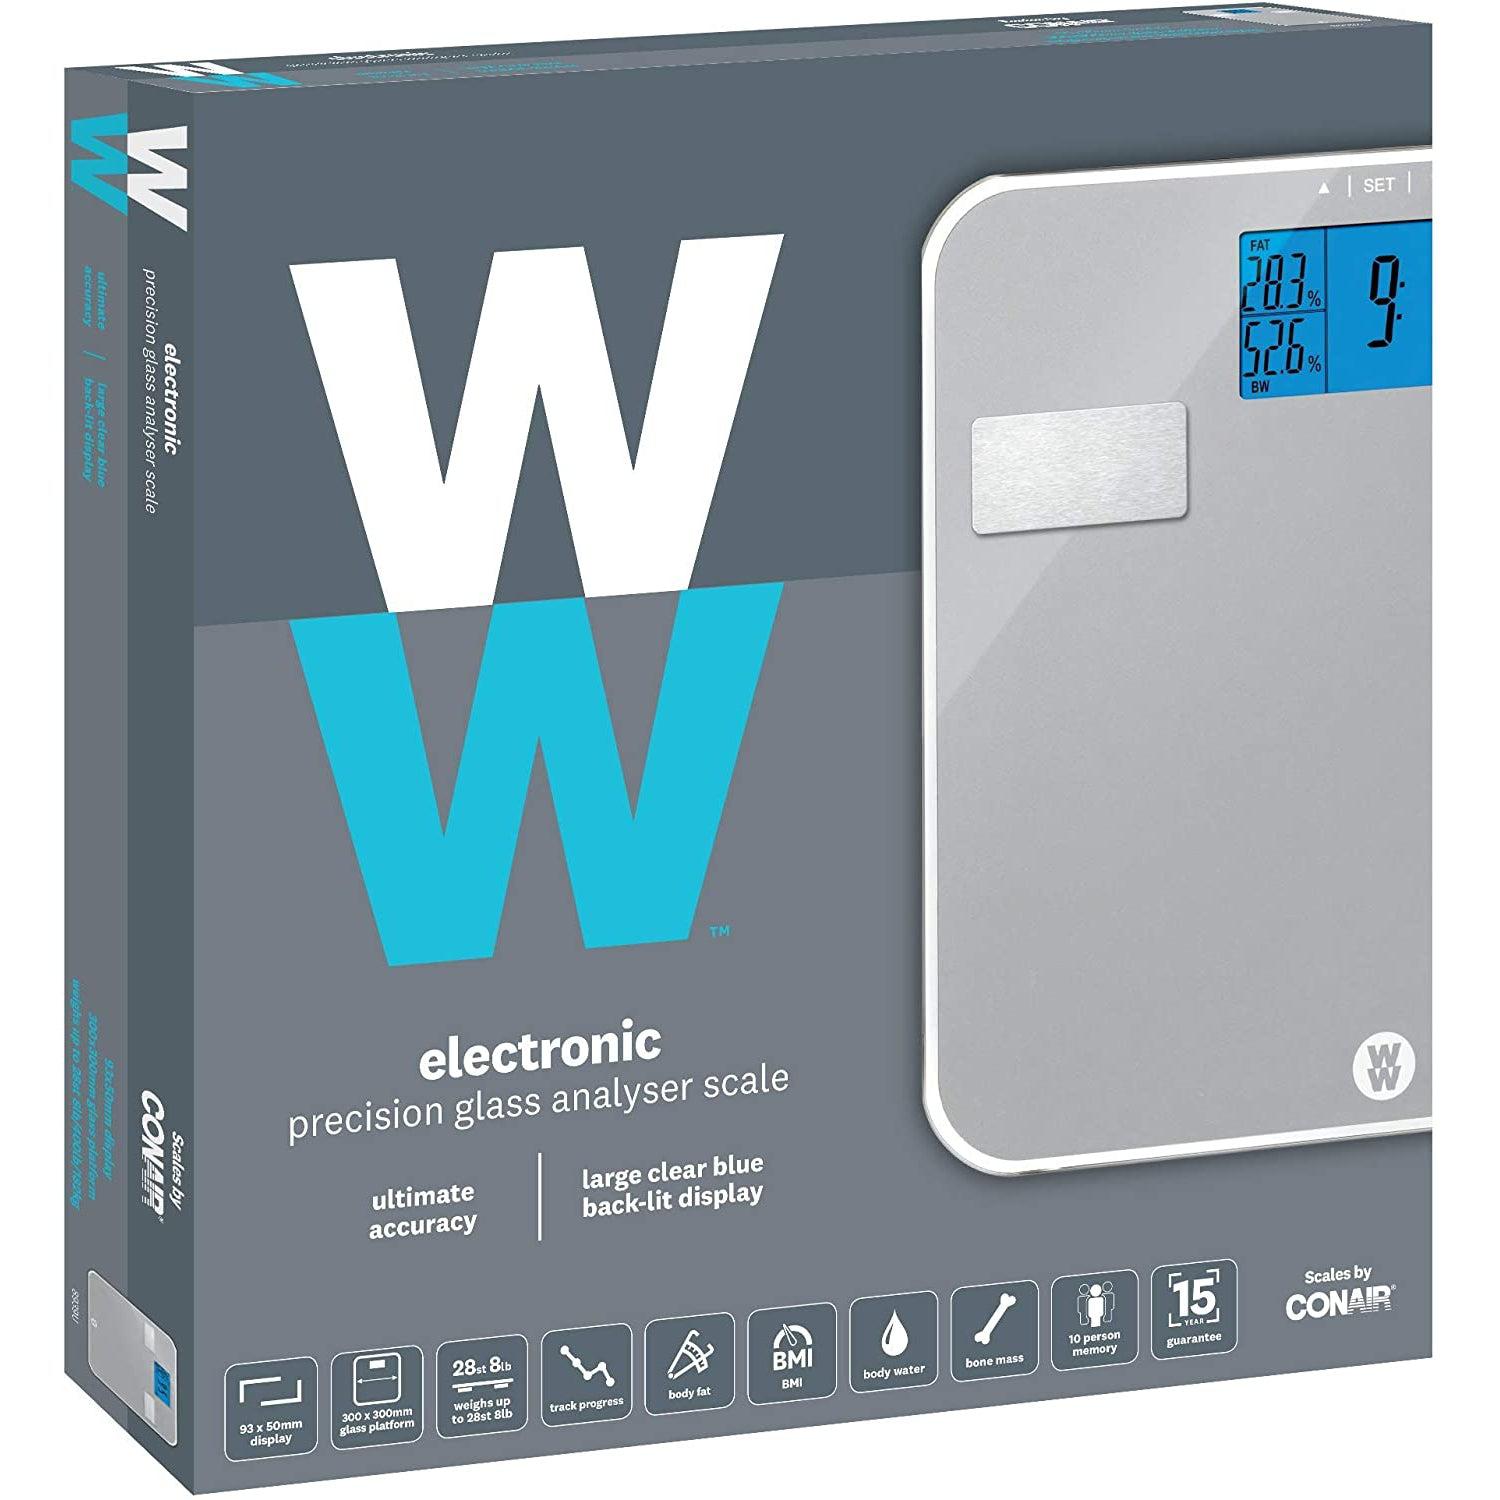 Weight Watchers Electronic Precision Analyser Glass Weighing Scales - BMI, Body Fat%, Body Water%, Bone Mass%